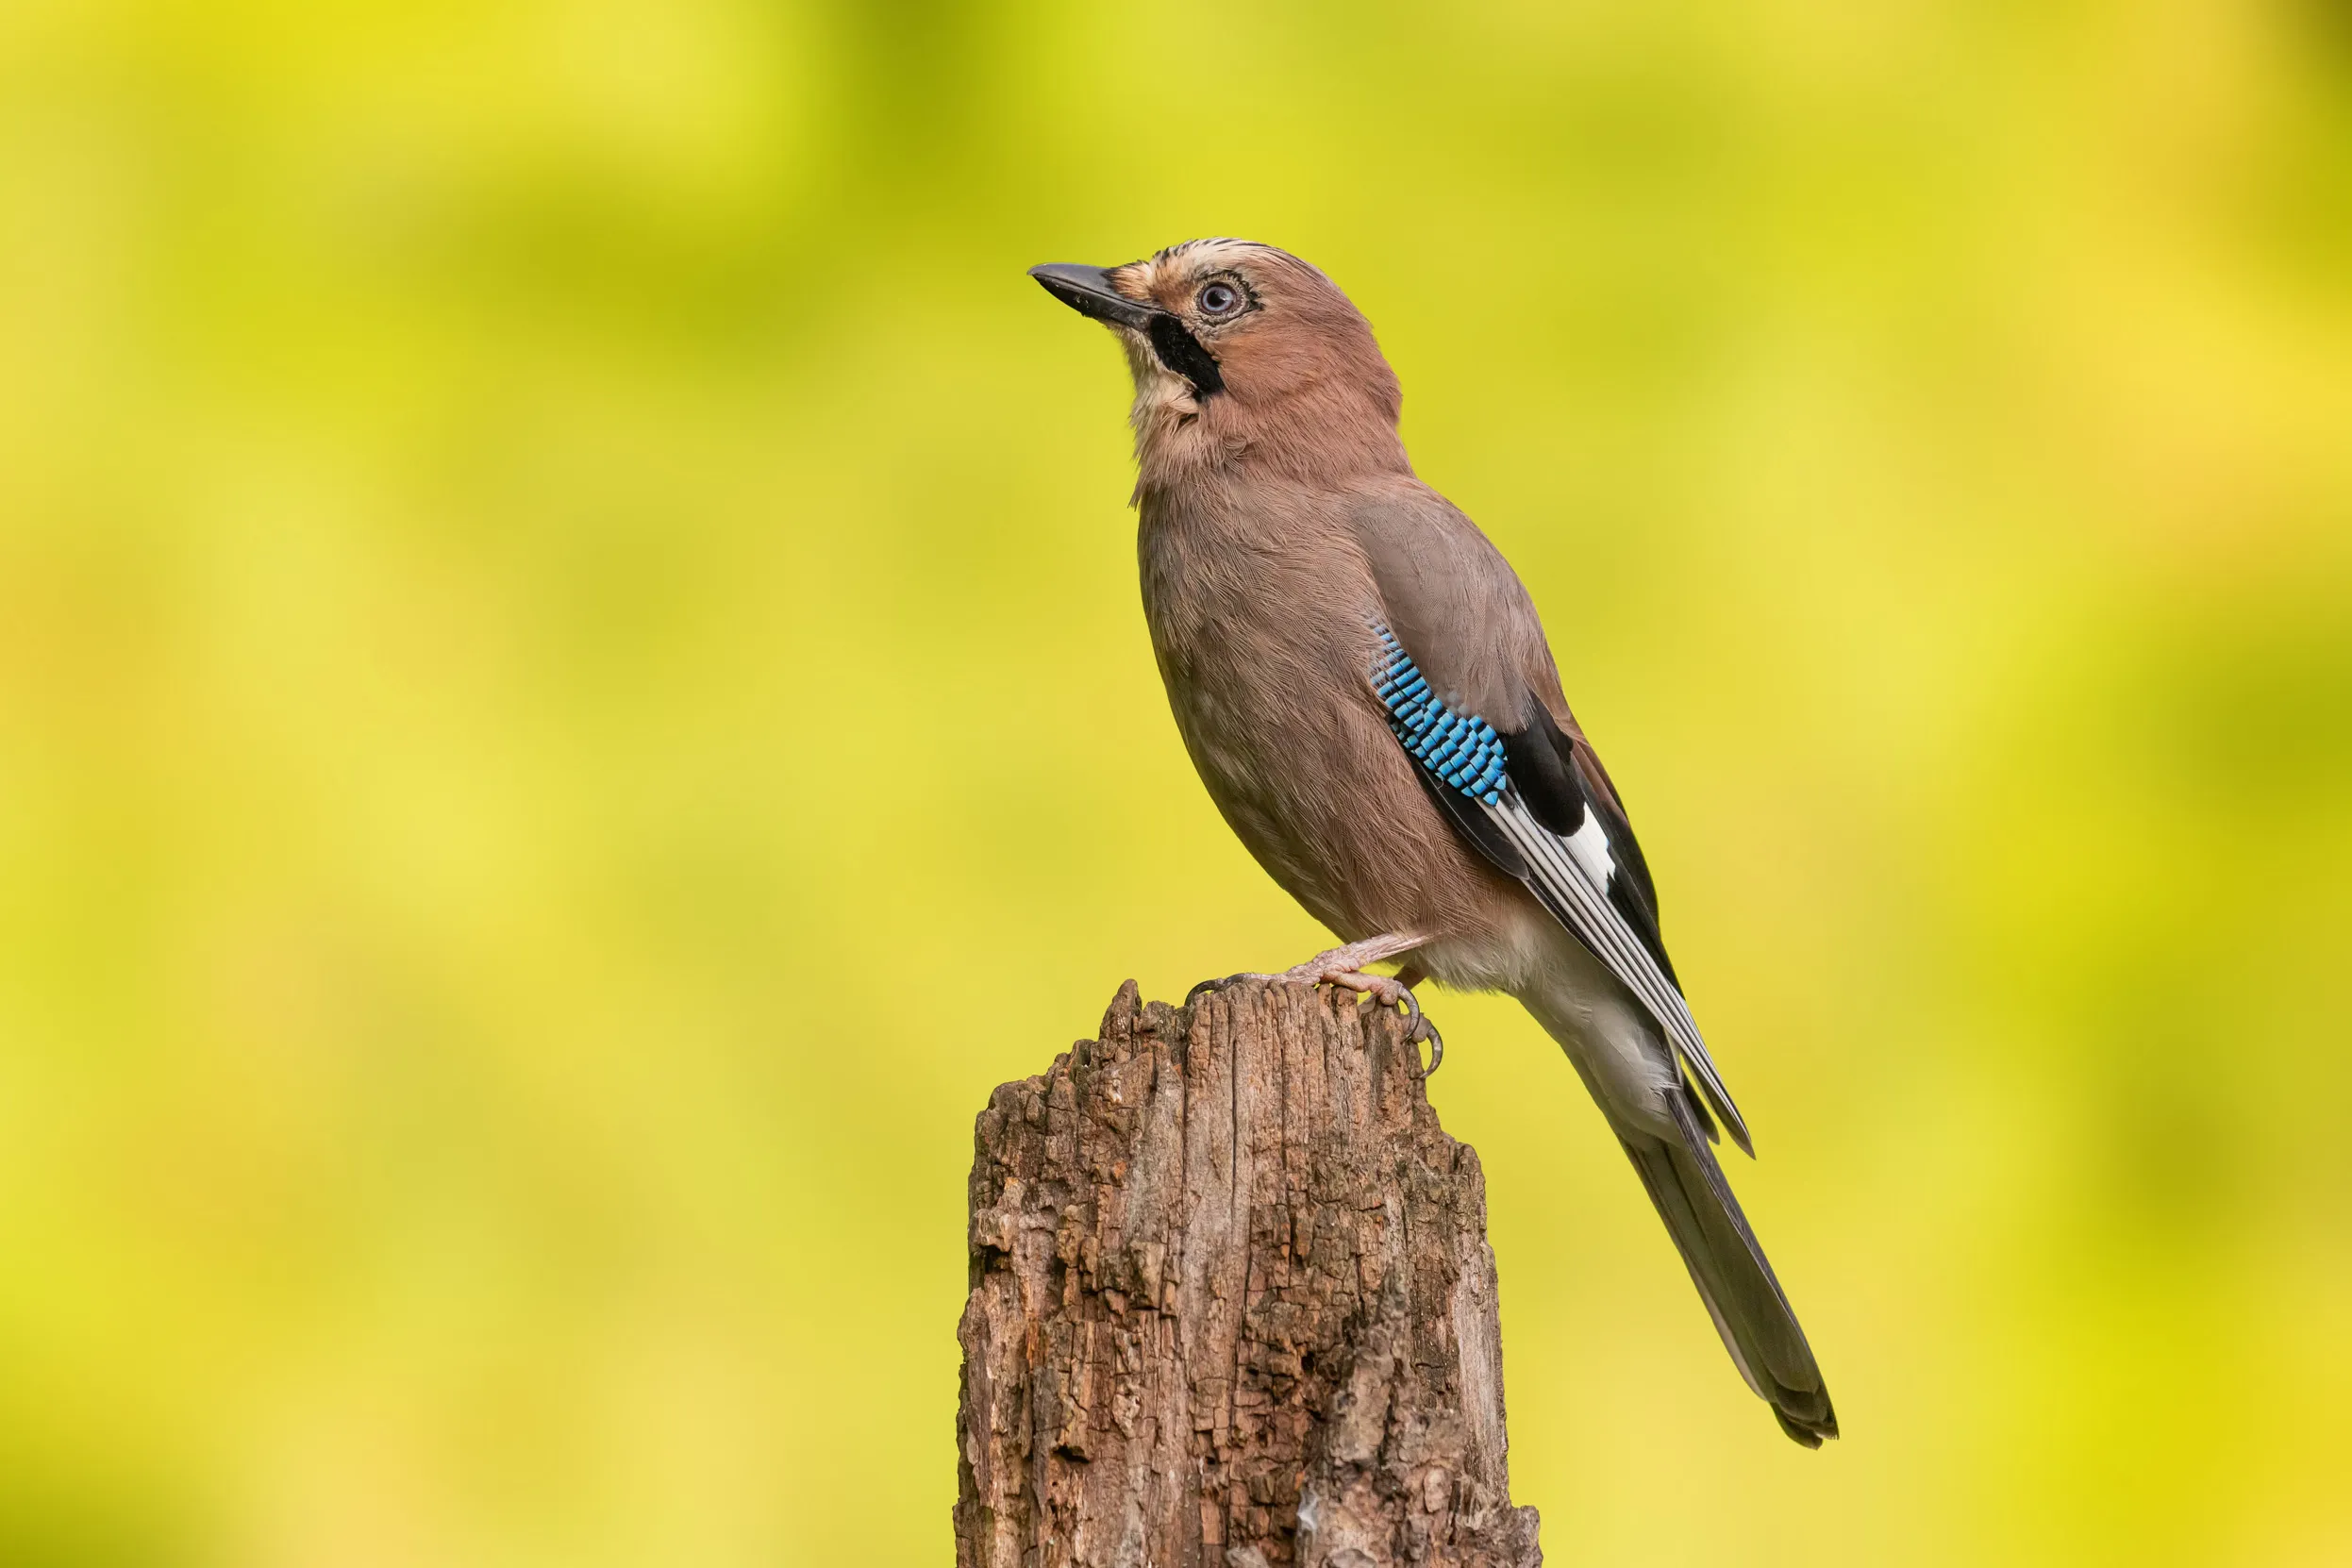 A Jay perched on the top of a broken log.